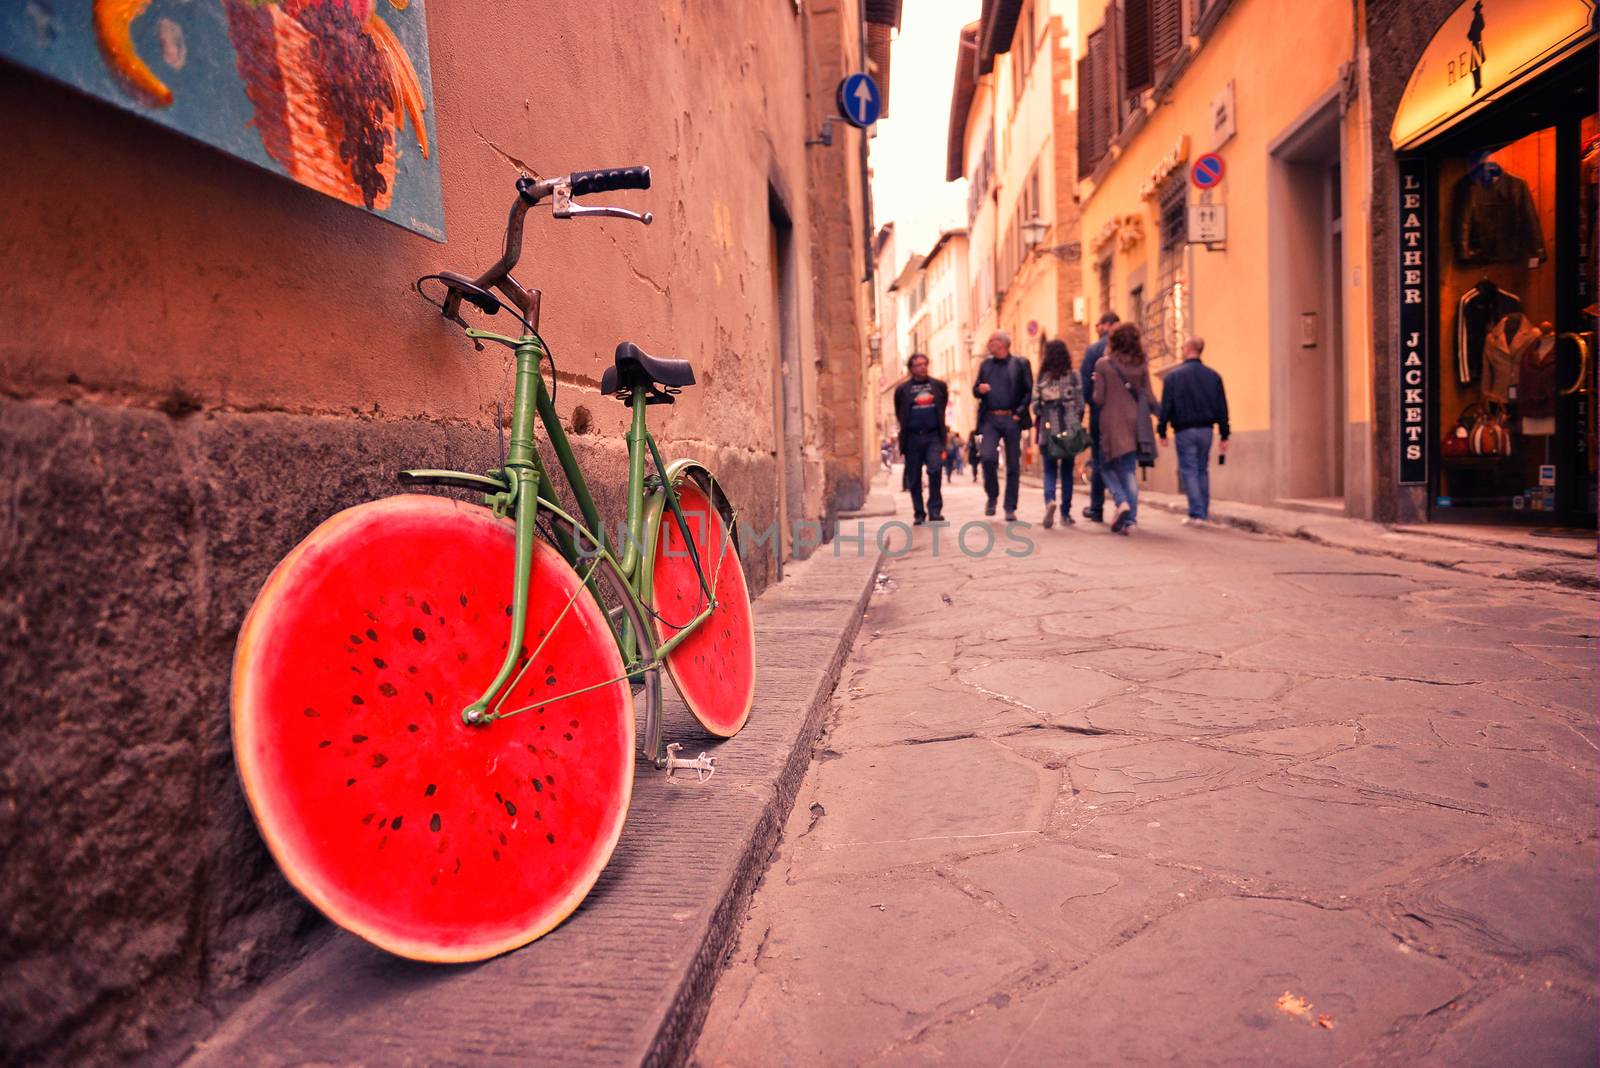 Old bicycle with watermelon wheels near the wall of the building.